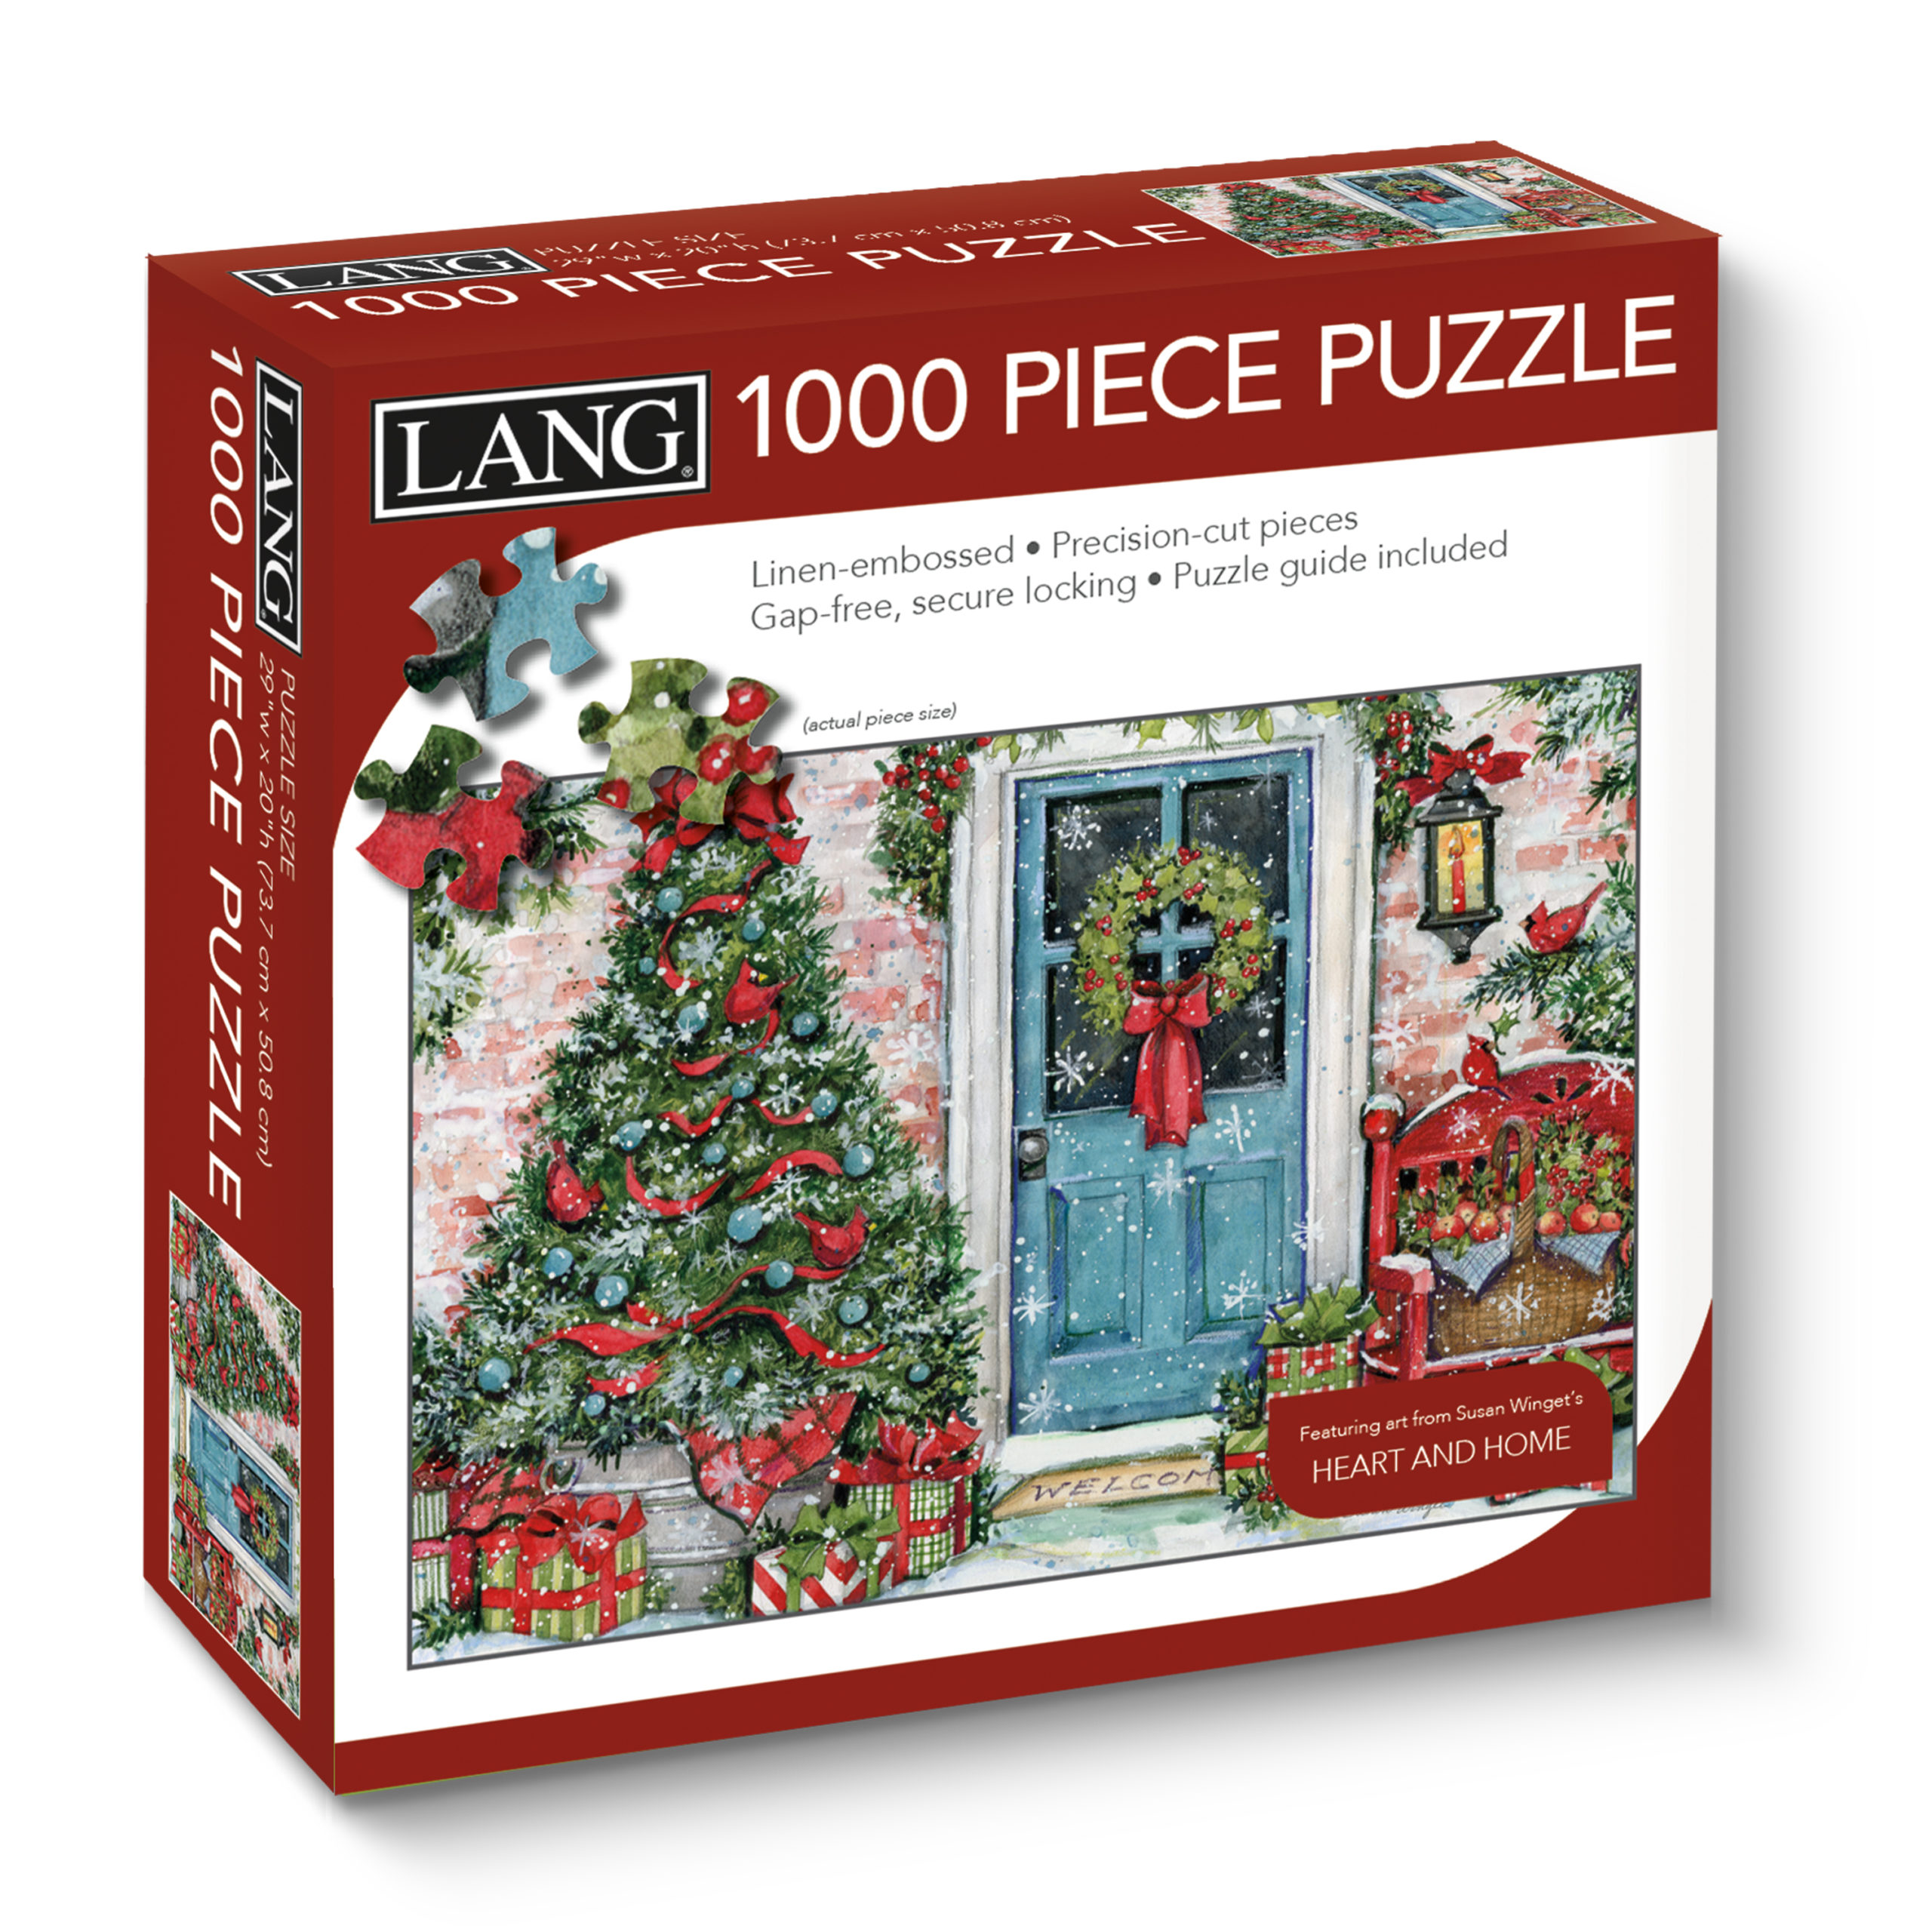 LANG 1000 Piece Puzzle 
															/ The LANG Companies							